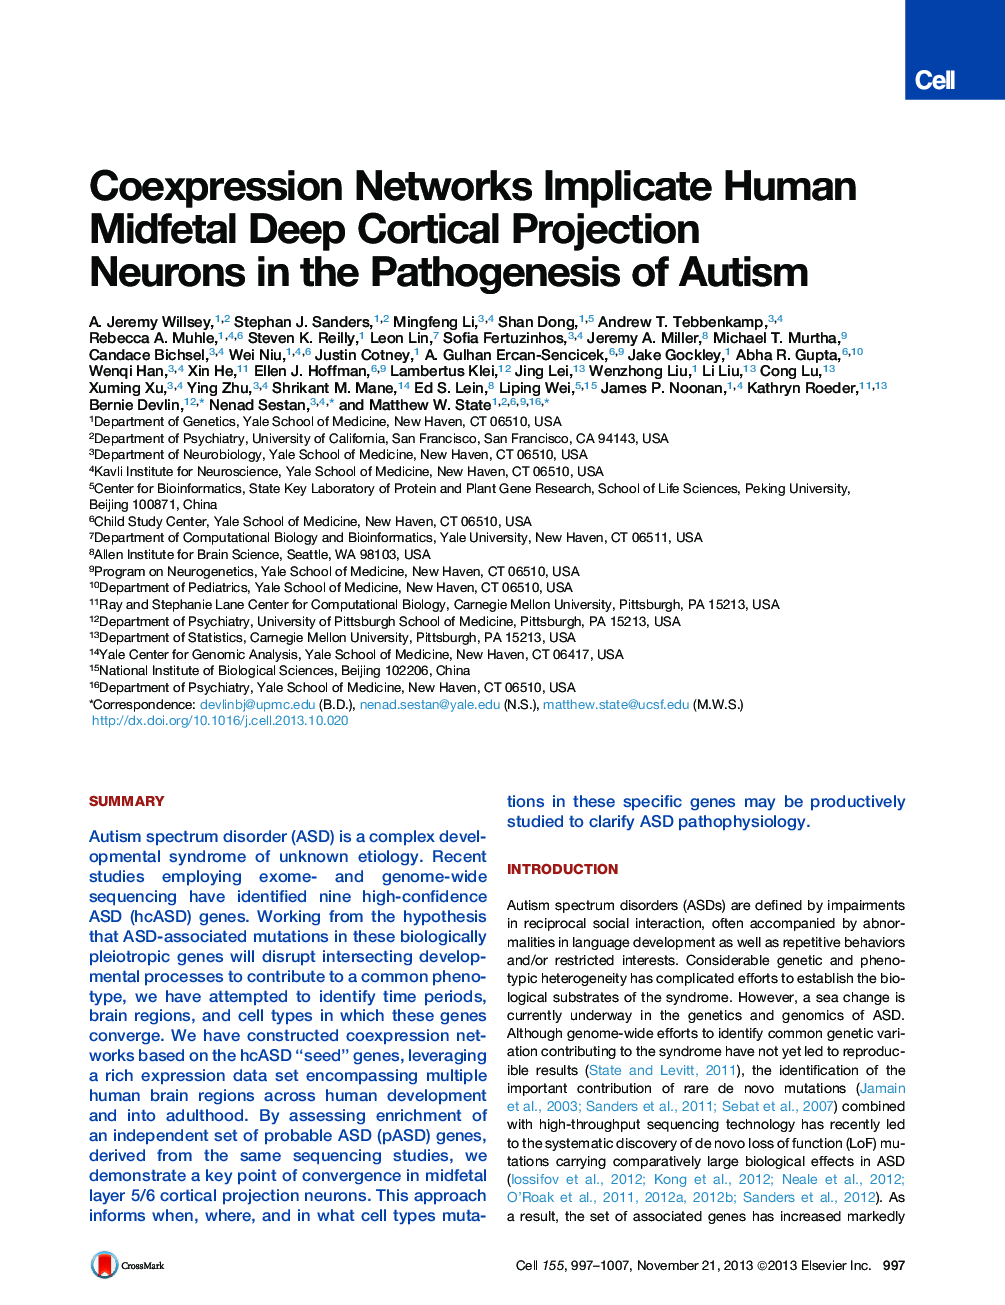 Coexpression Networks Implicate Human Midfetal Deep Cortical Projection Neurons in the Pathogenesis of Autism